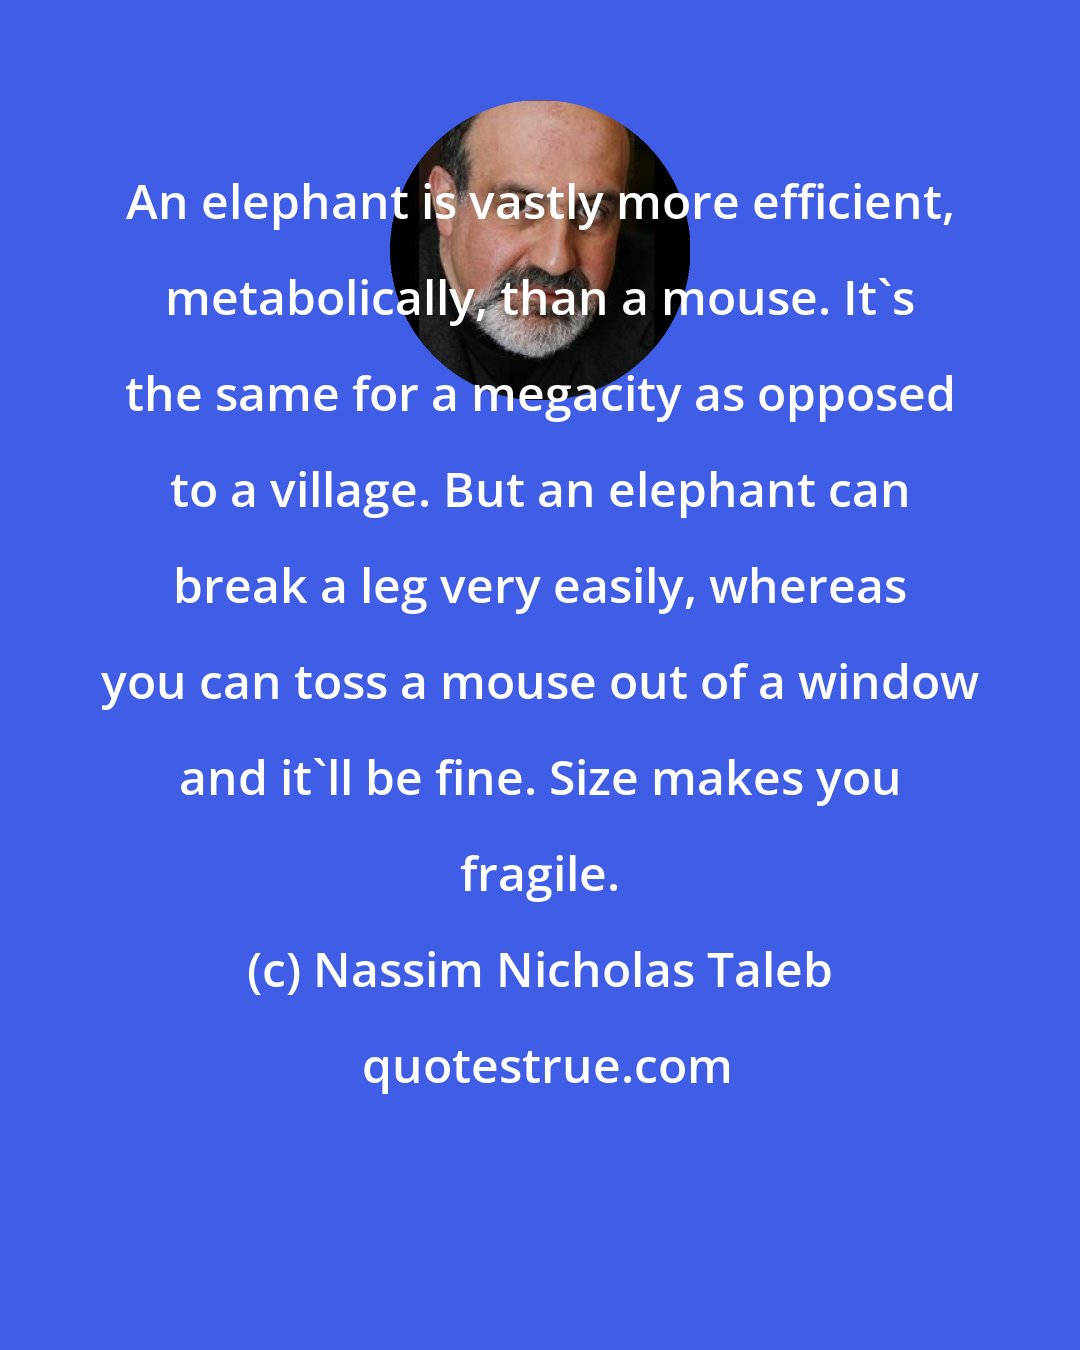 Nassim Nicholas Taleb: An elephant is vastly more efficient, metabolically, than a mouse. It's the same for a megacity as opposed to a village. But an elephant can break a leg very easily, whereas you can toss a mouse out of a window and it'll be fine. Size makes you fragile.